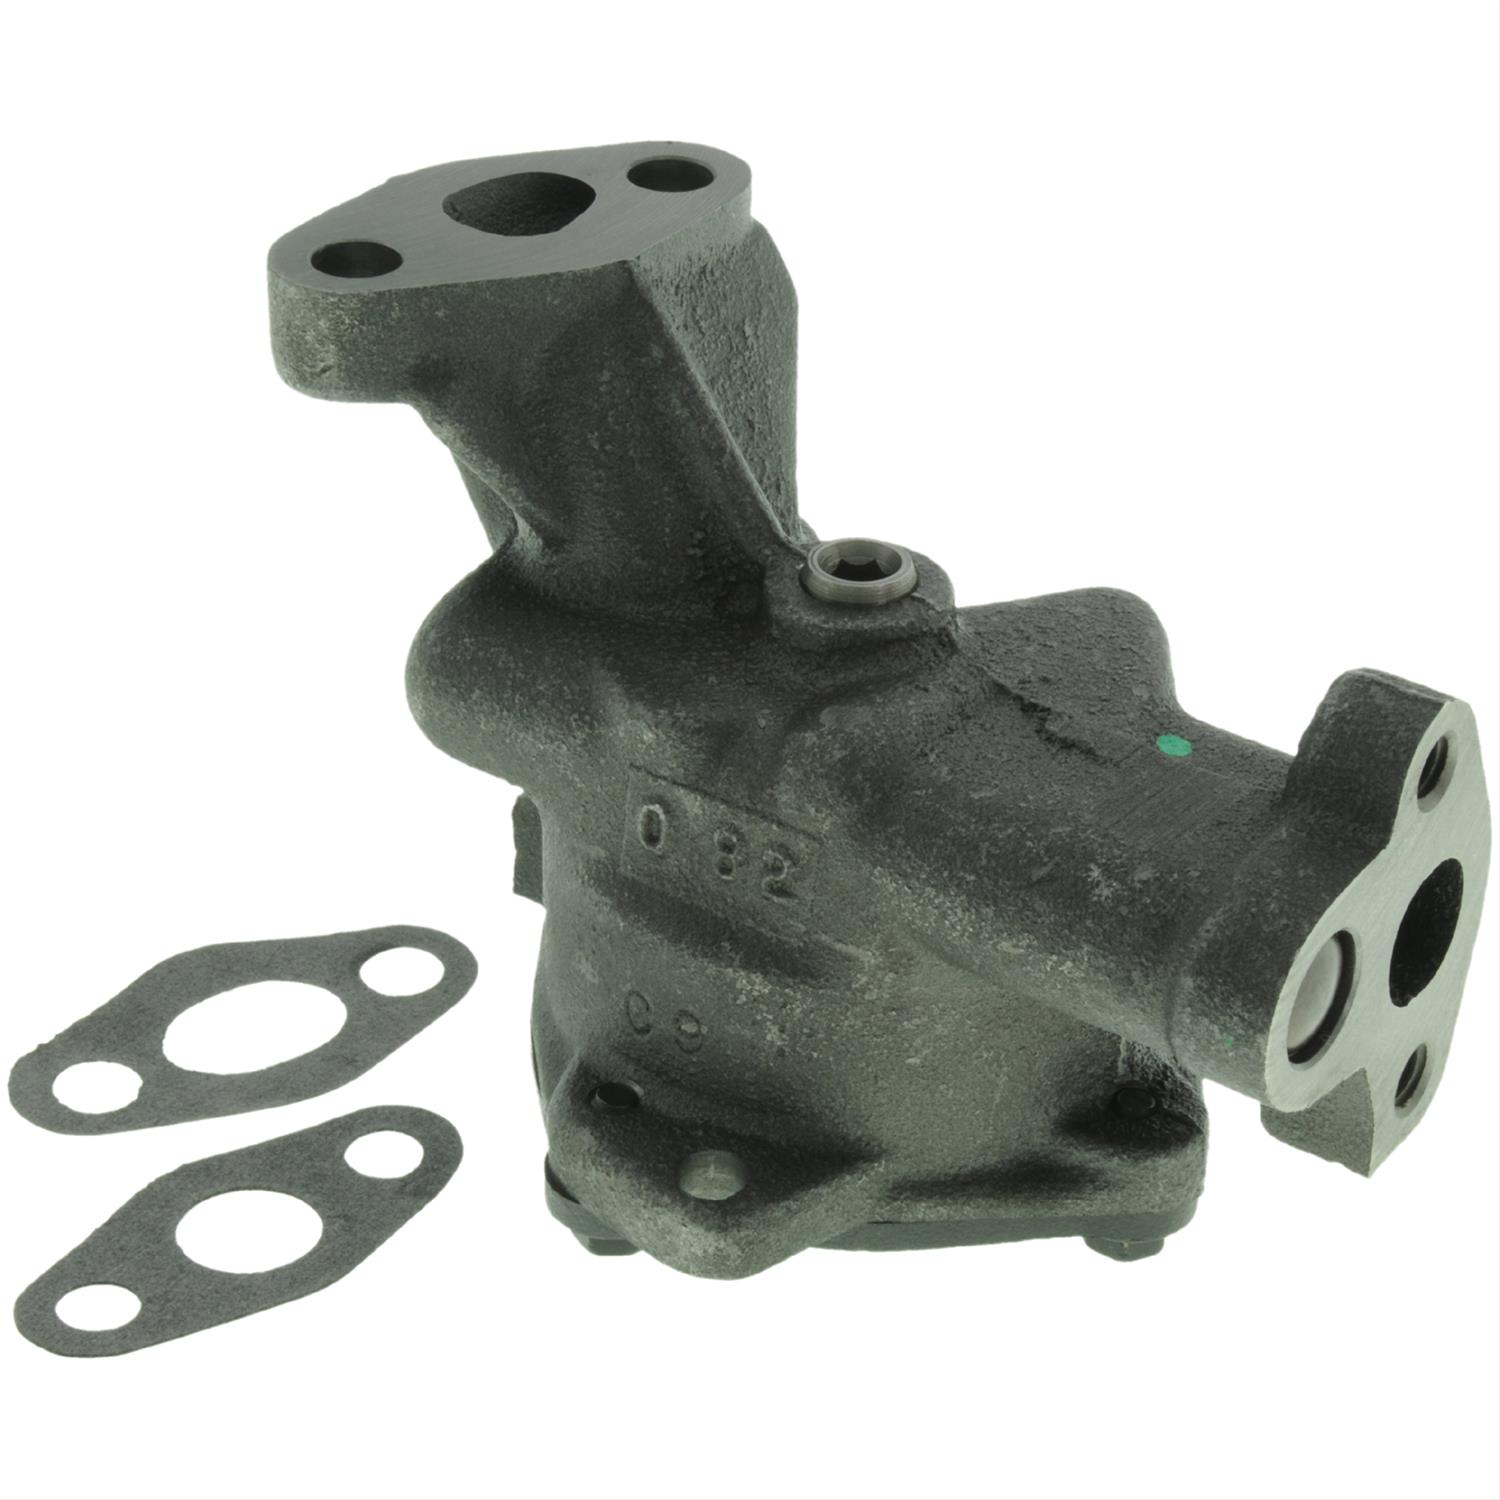 Melling M-68 Engine Oil Pump Ford 289-302 M68 Stock Volume 